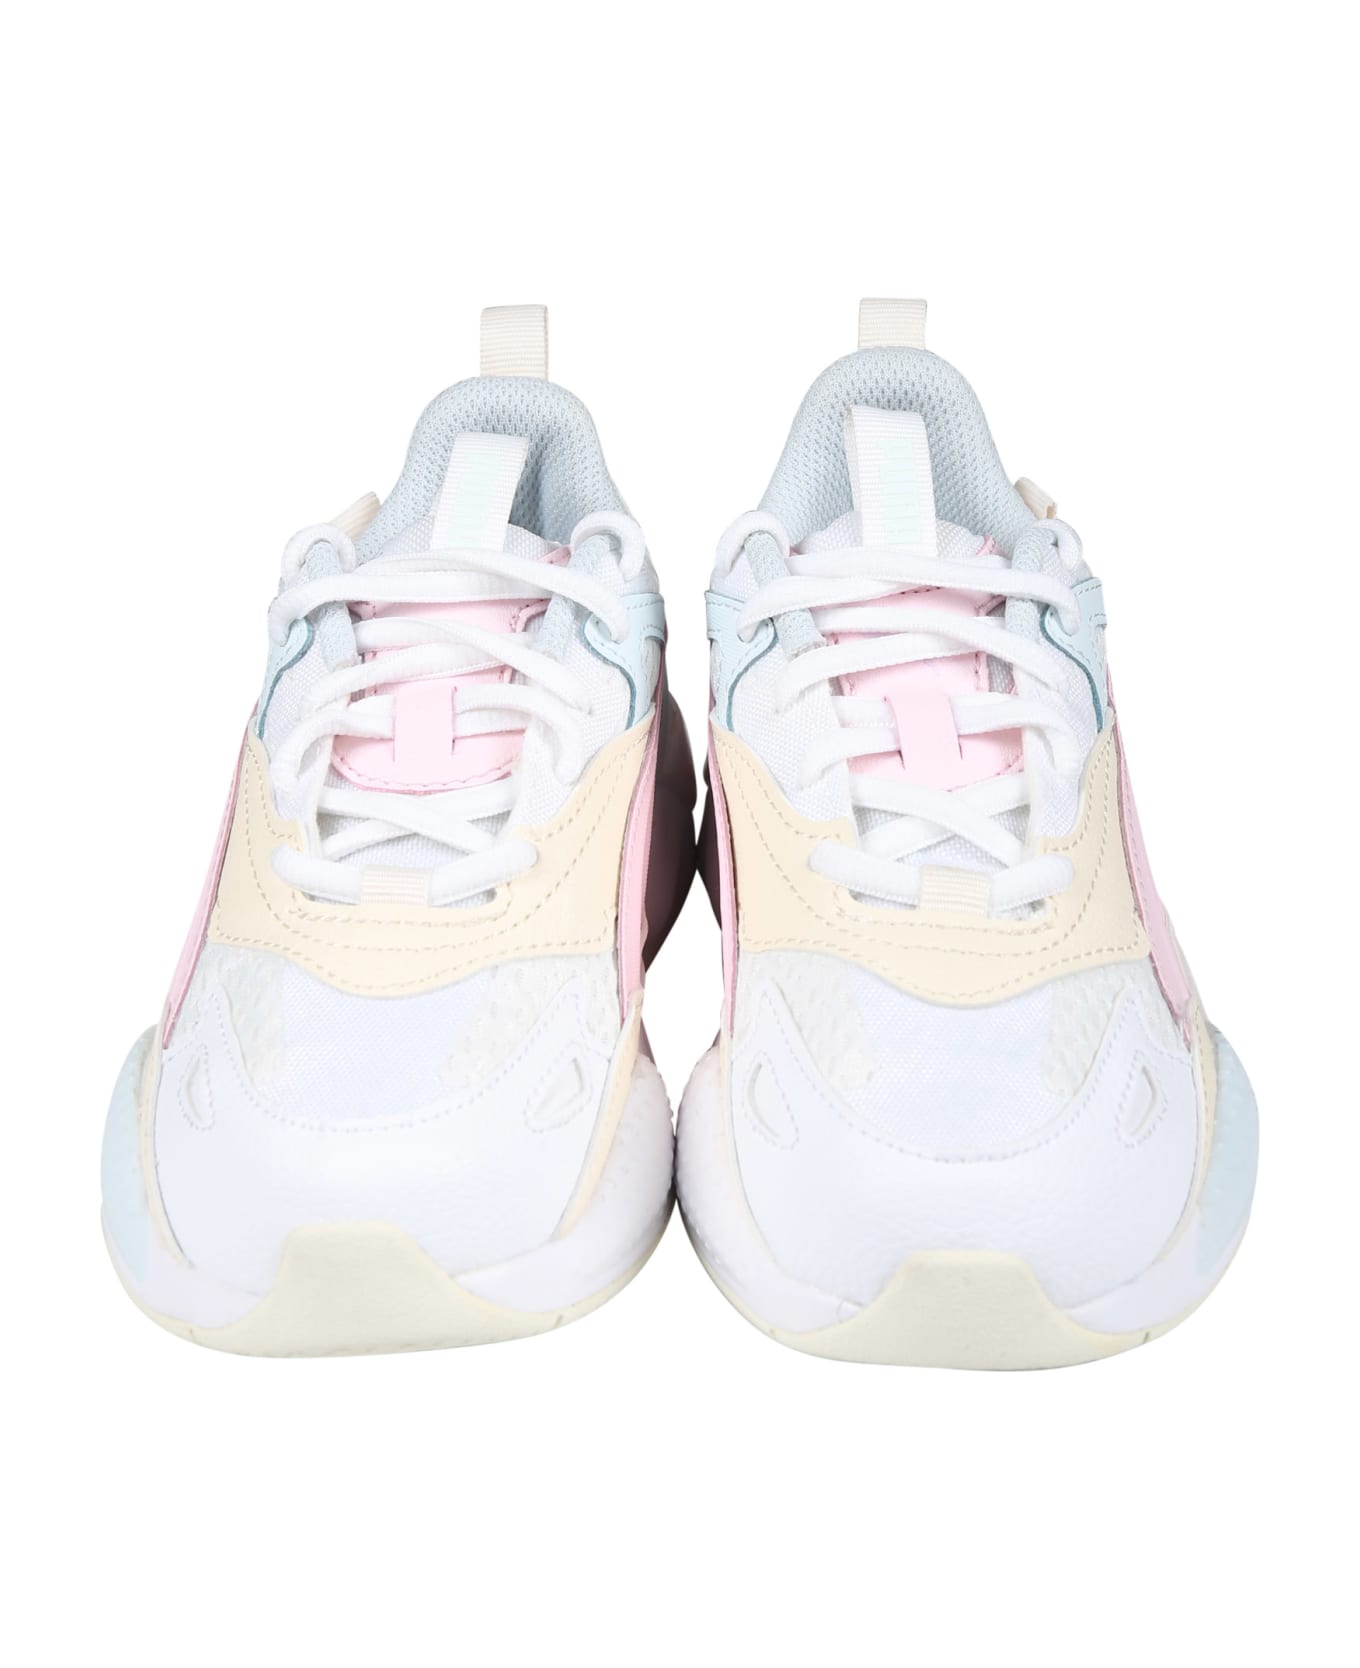 Puma Palermo Lth White Low Sneakers For Girl - White シューズ